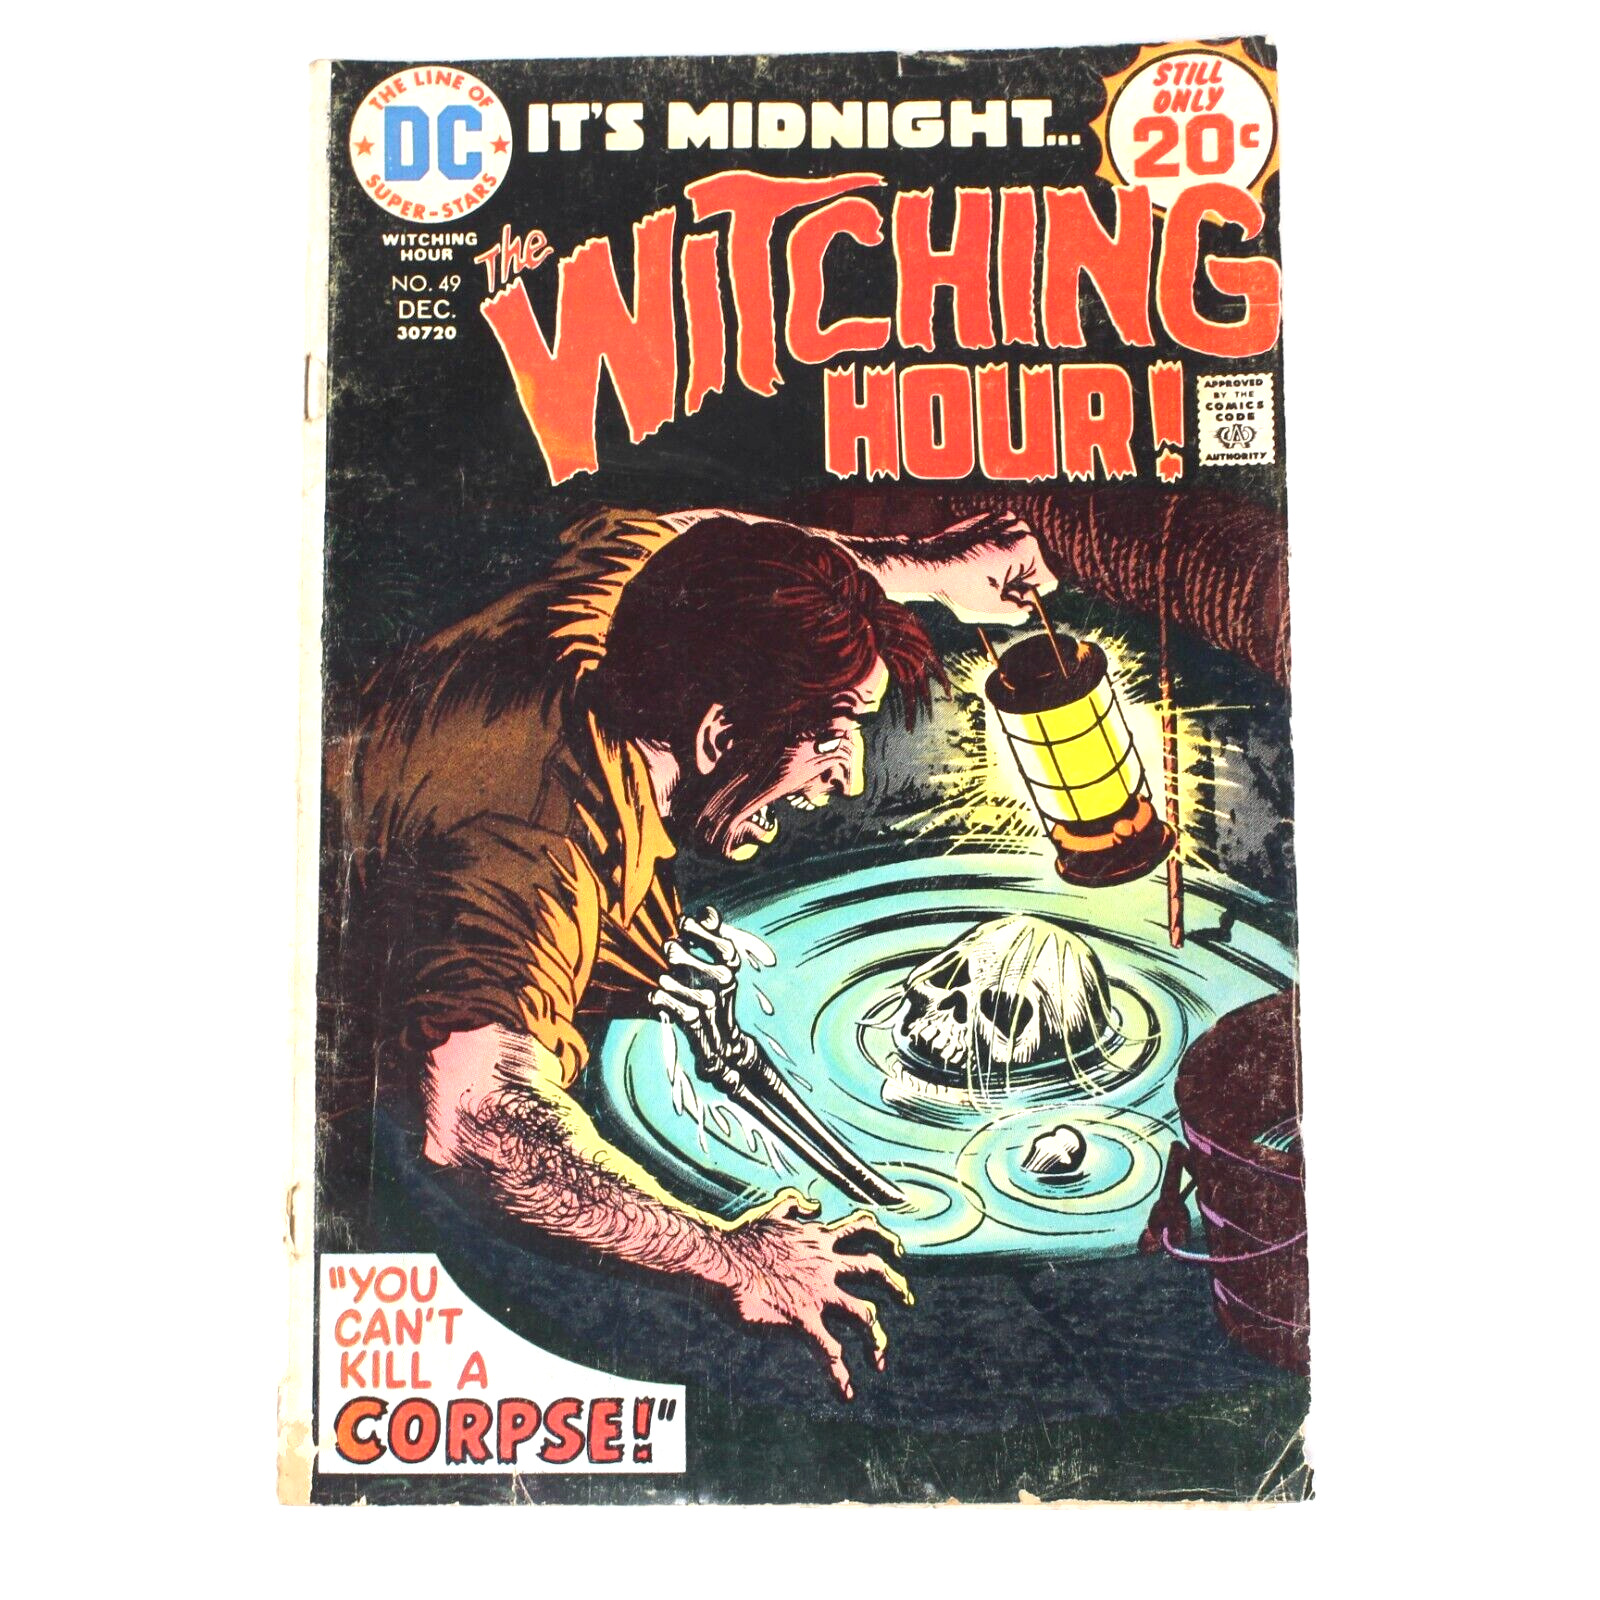 It\'s Midnight...The Witching Hour Issue no. 49 December 1974 DC Horror Comic